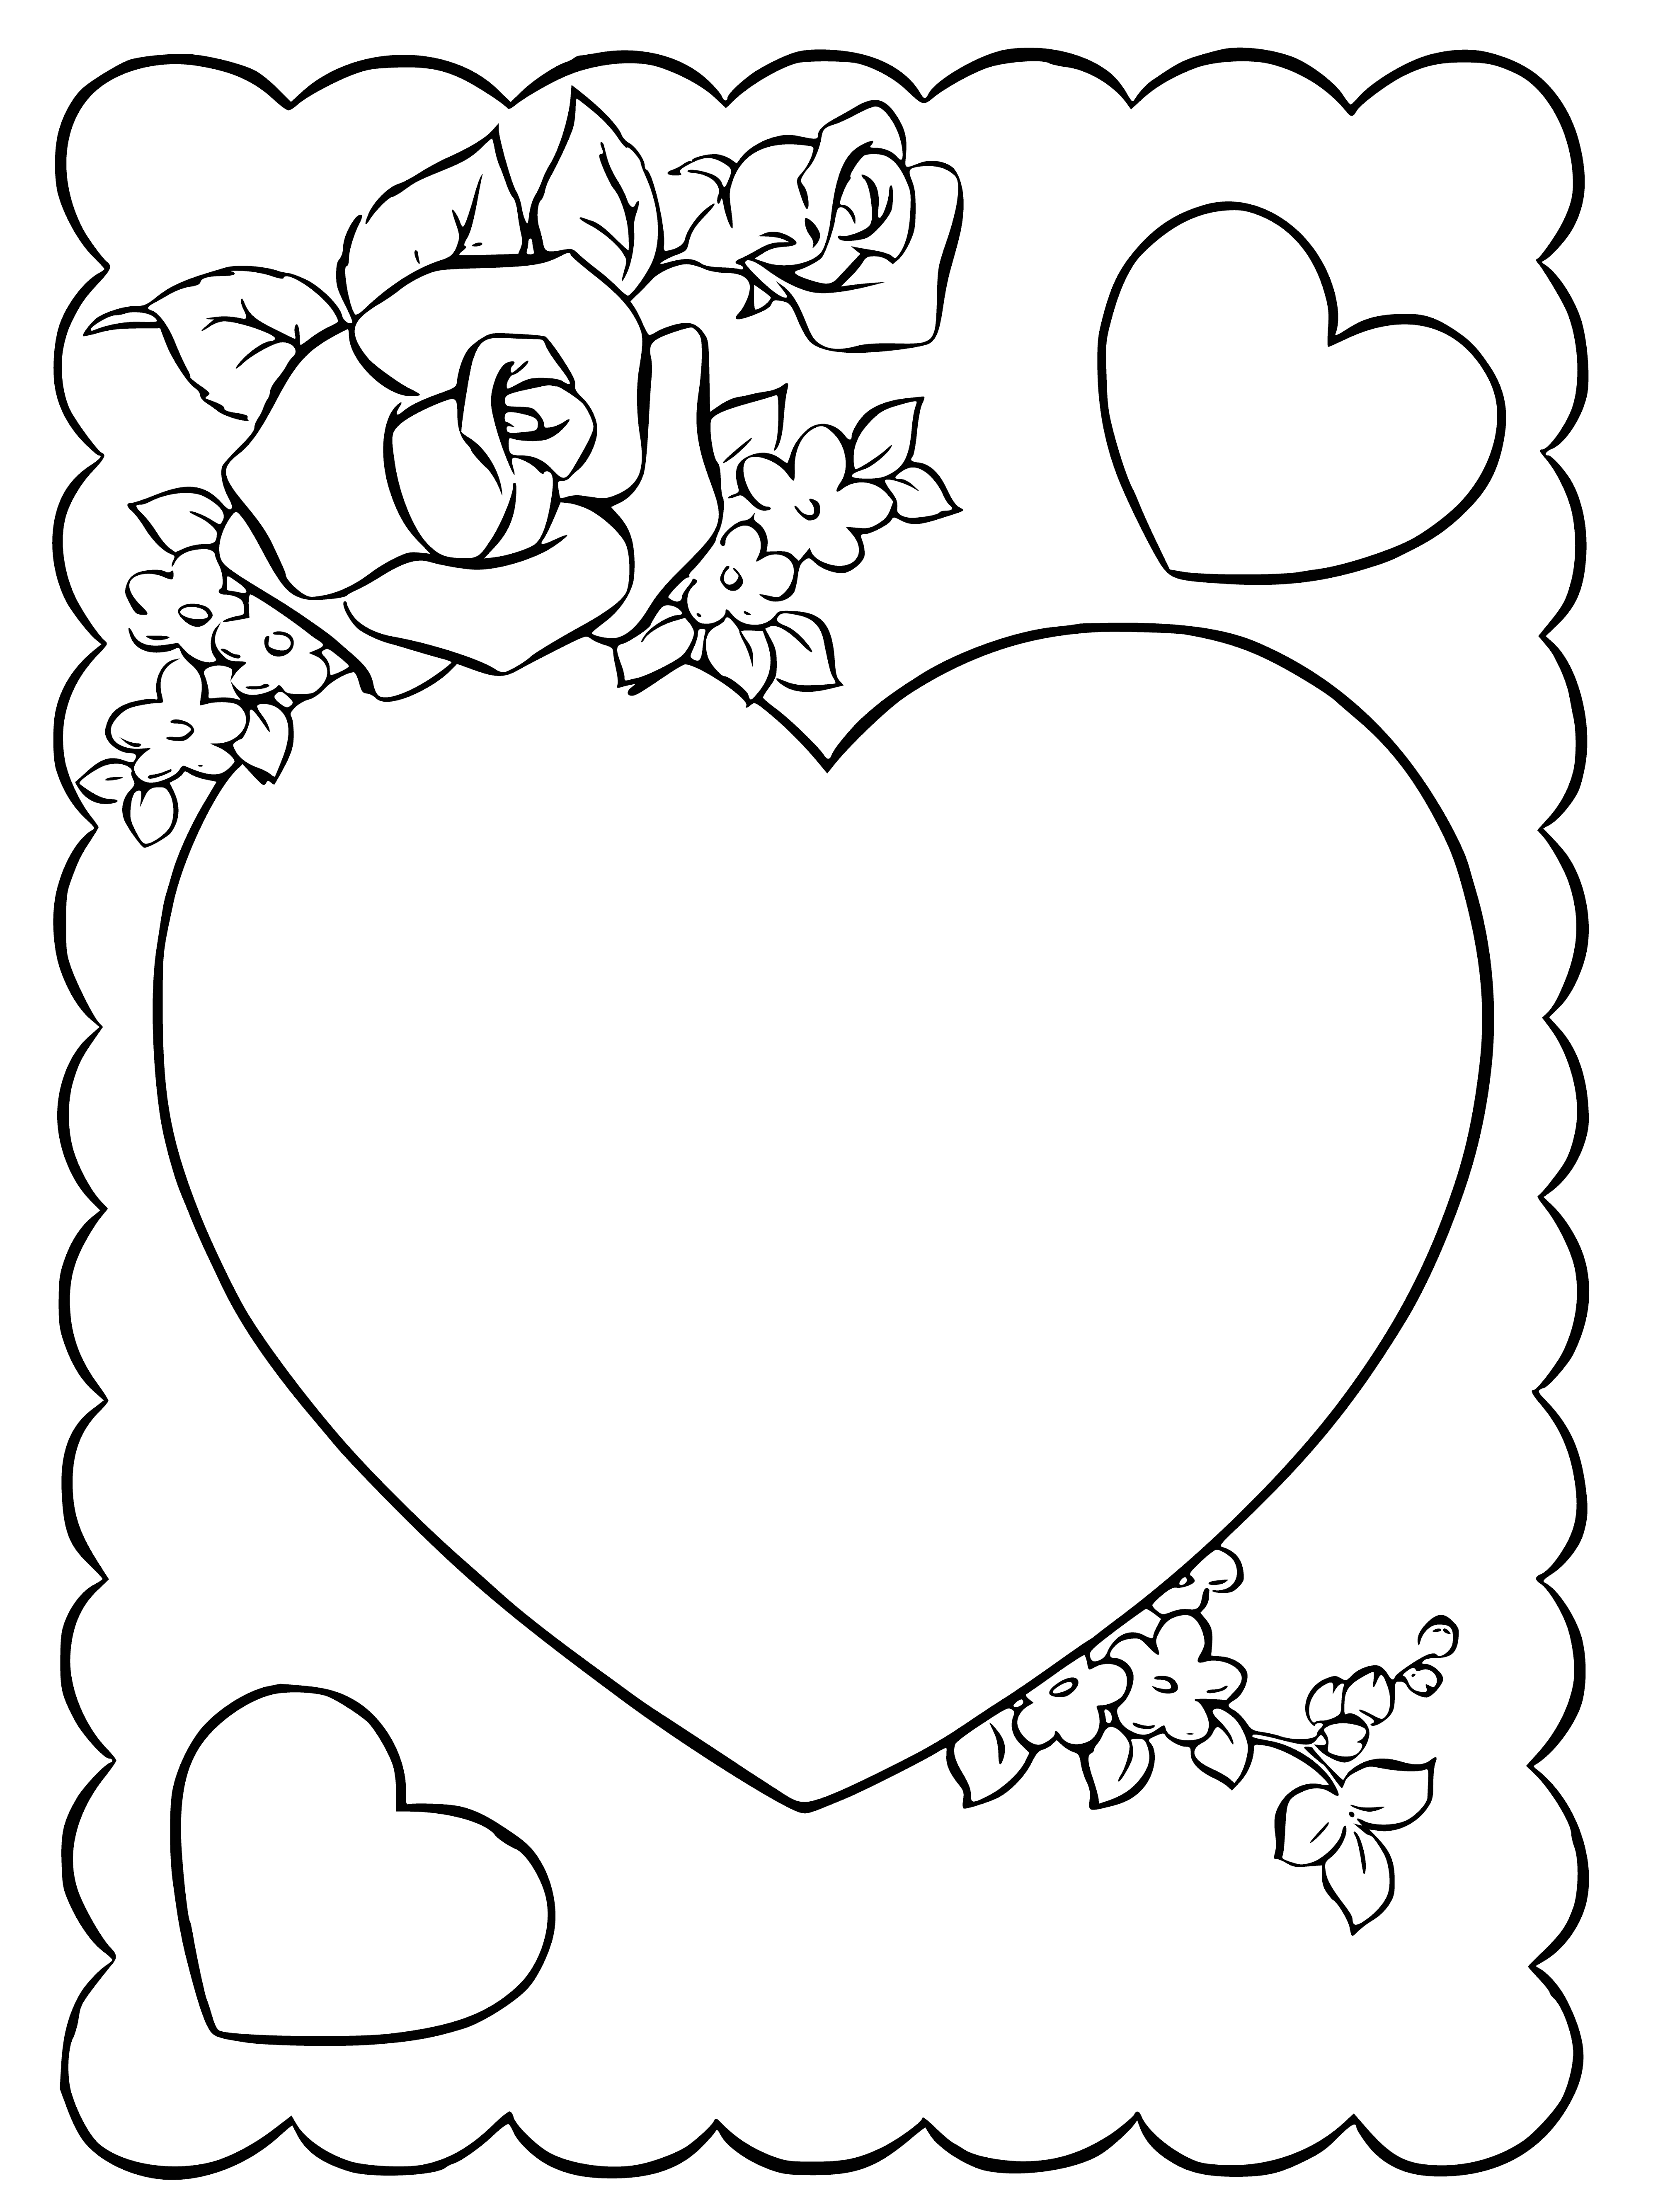 Greeting card with heart and flowers coloring page